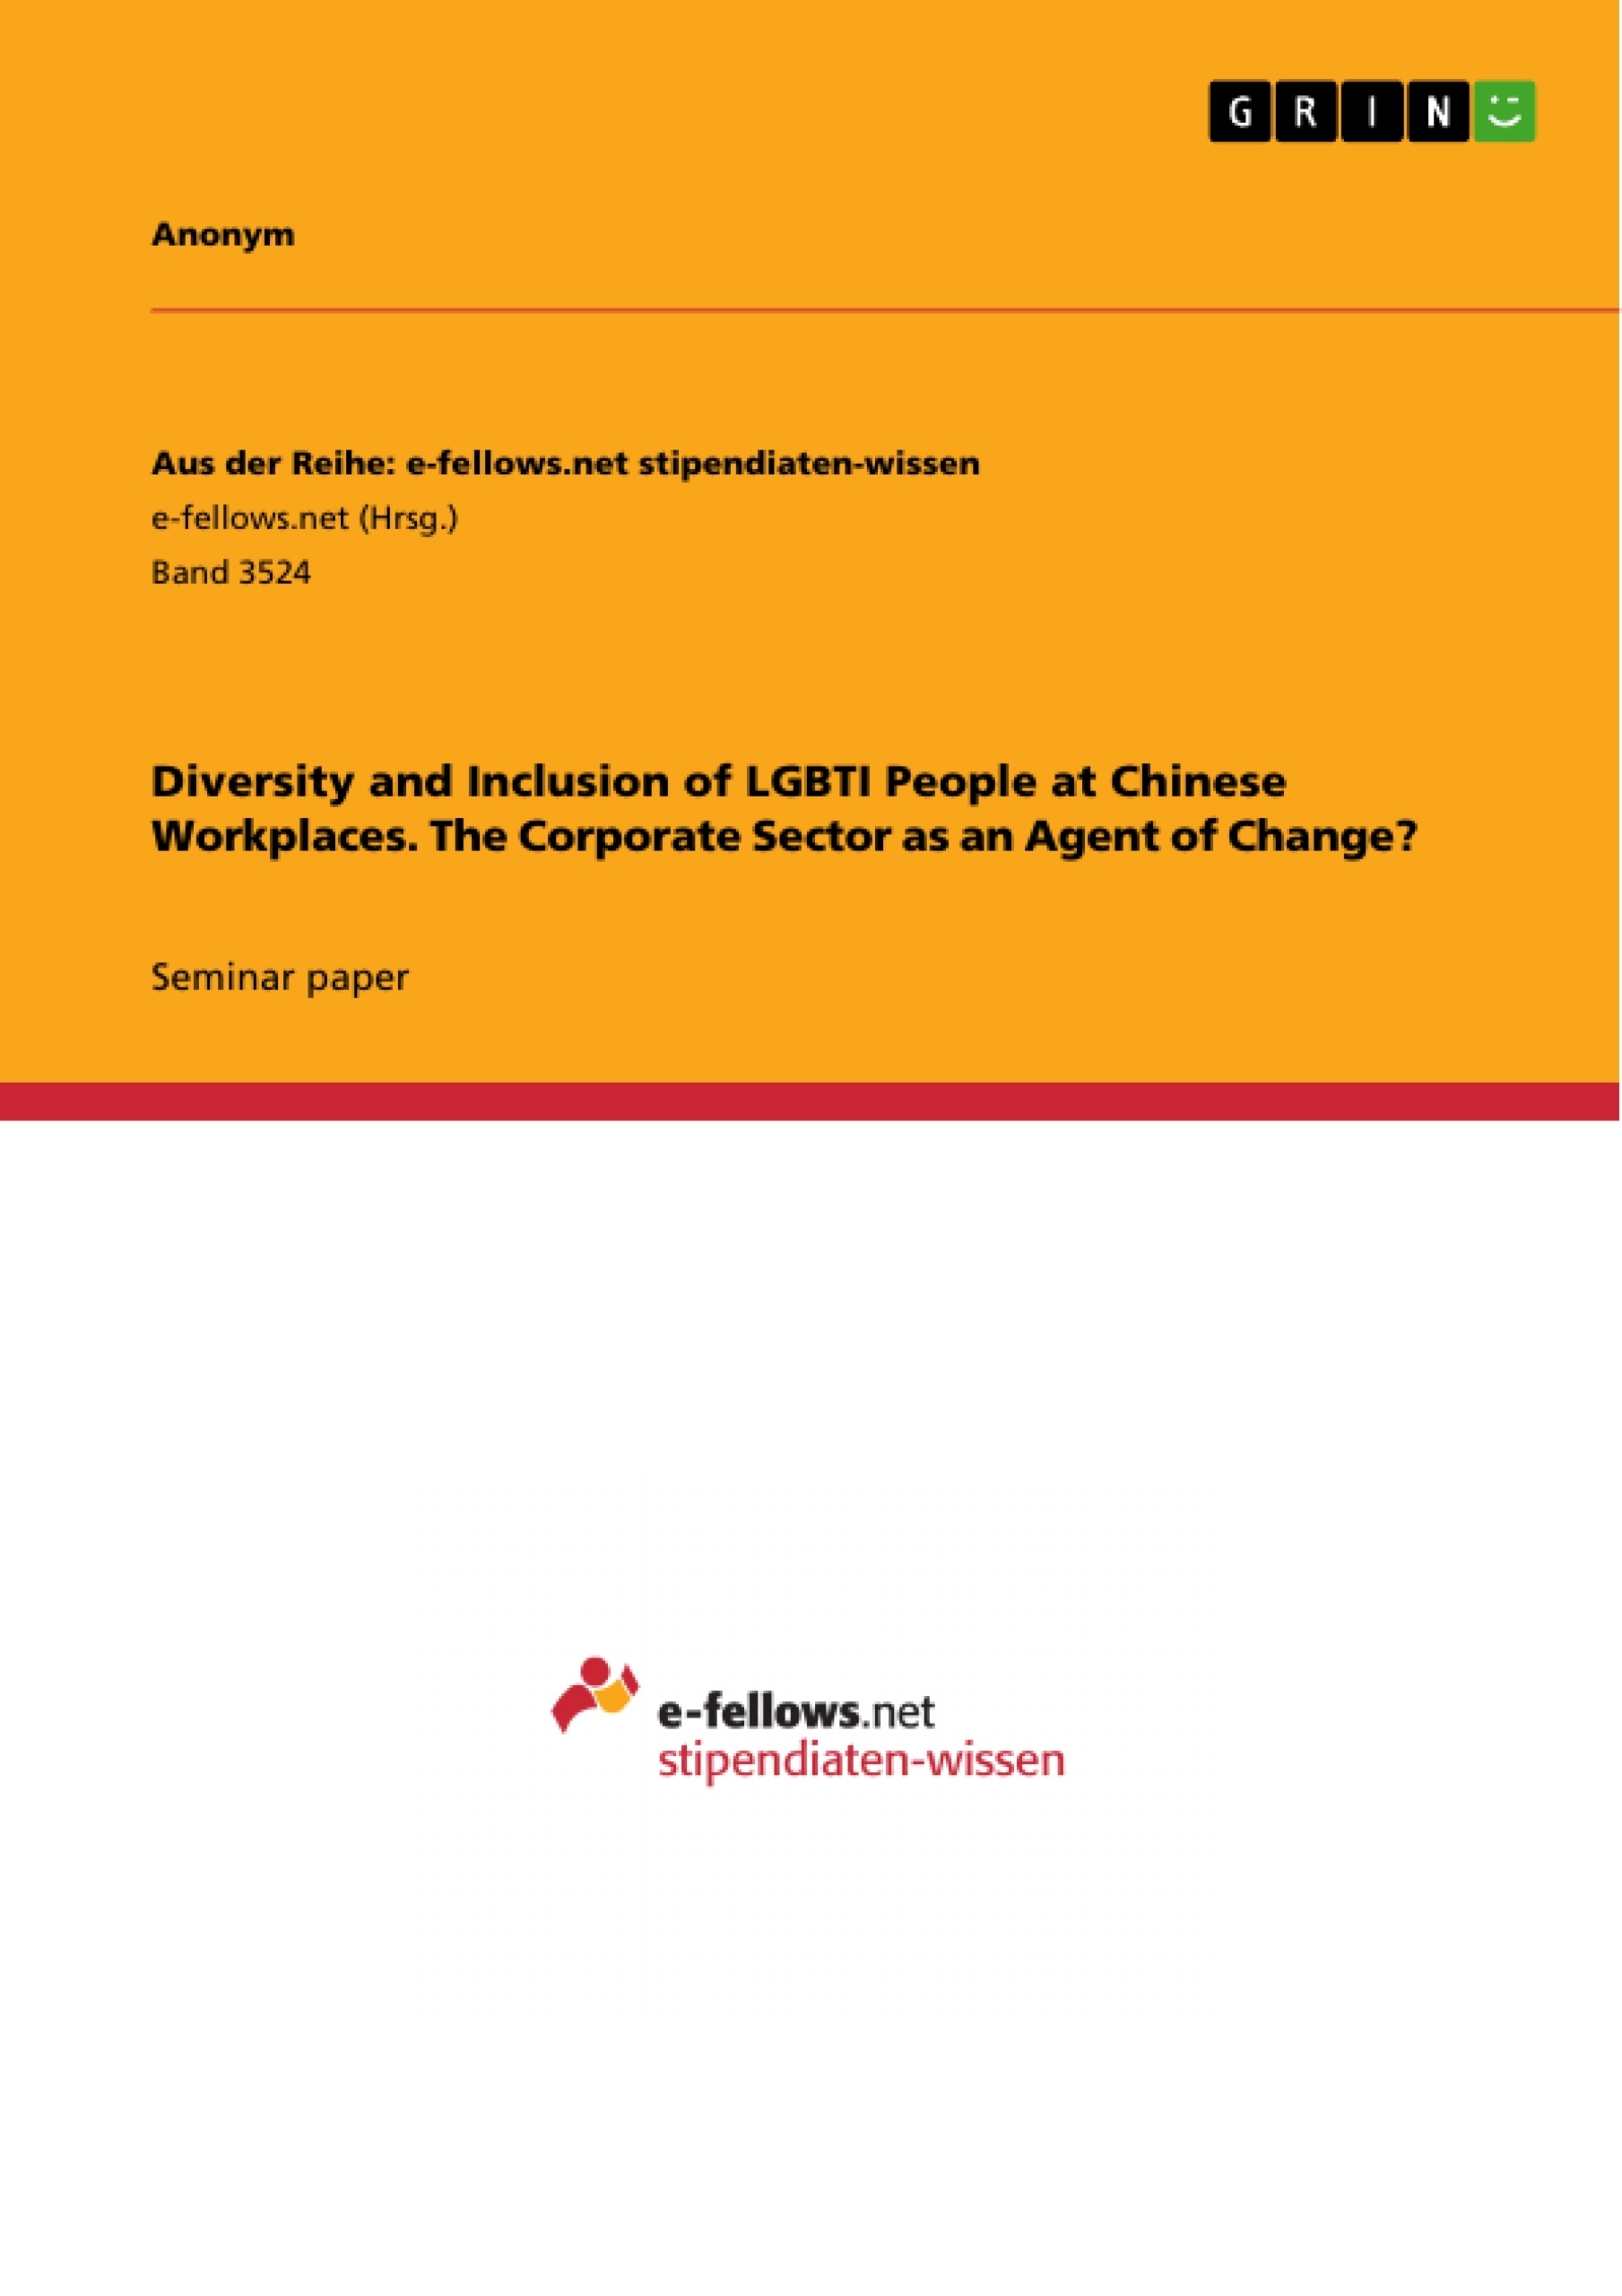 Title: Diversity and Inclusion of LGBTI People at Chinese Workplaces. The Corporate Sector as an Agent of Change?